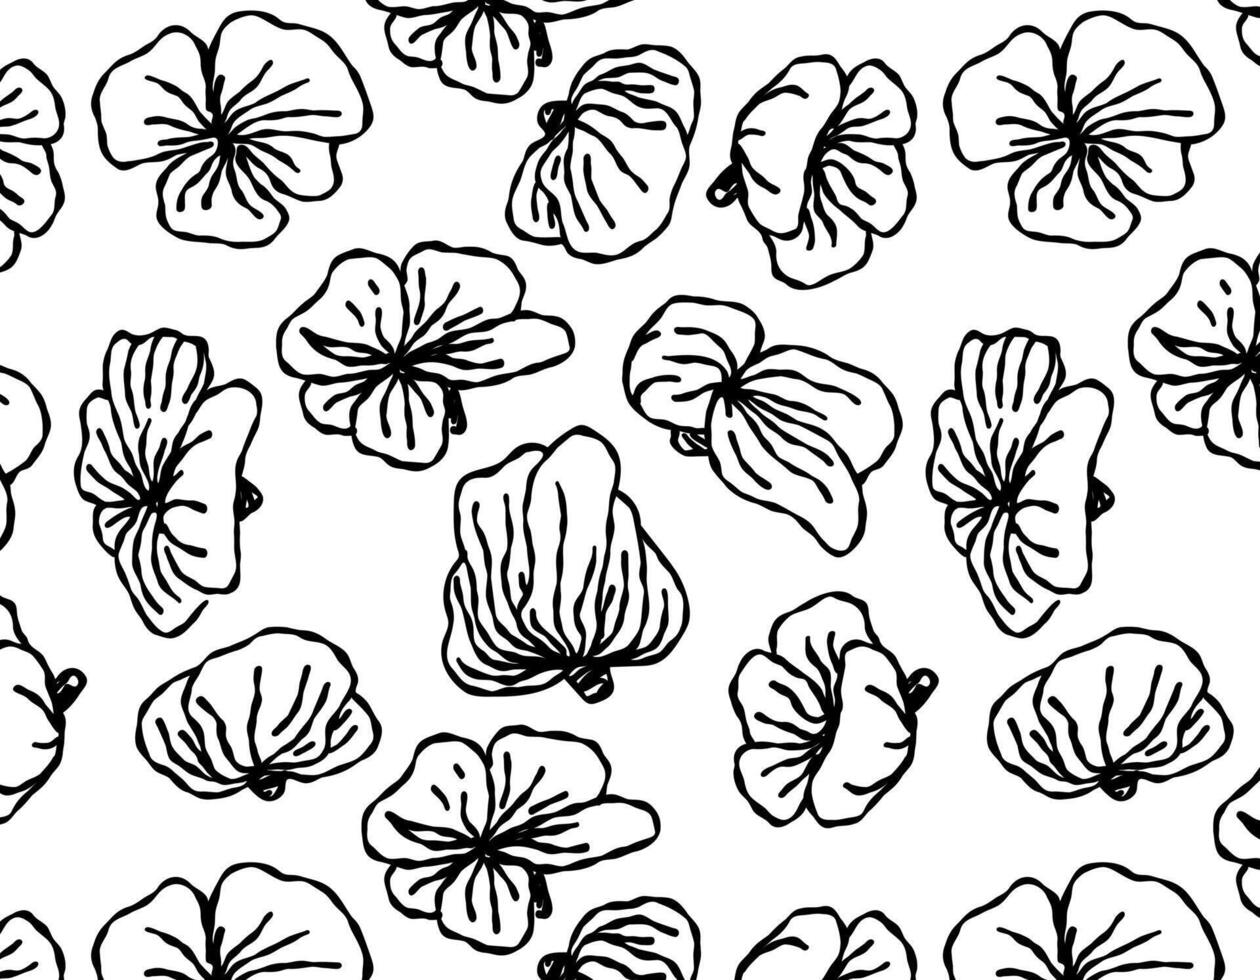 Seamless pattern with black brush flowers on a white background. Ink drawing of wild plants, herbs or flowers. Abstract organic background. vector